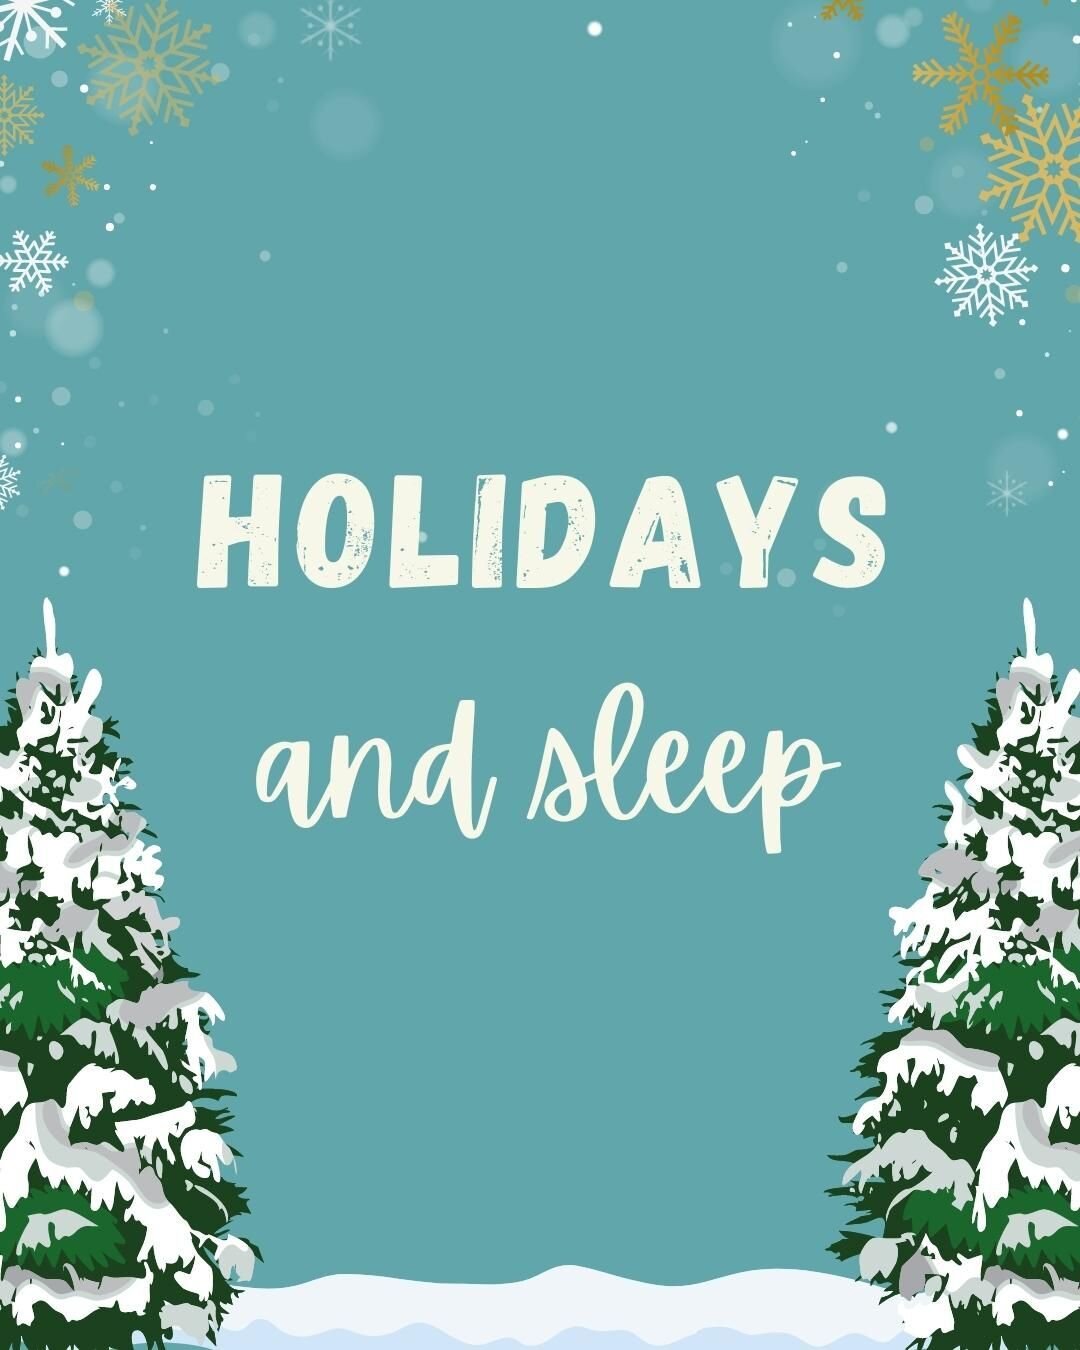 If your family is like mine, November 1st means Halloween is over and Christmas is here. The next two months are full of holiday parties, family visiting, travel, and late nights full of excitement and anticipation. It&rsquo;s prime time for bedtime 